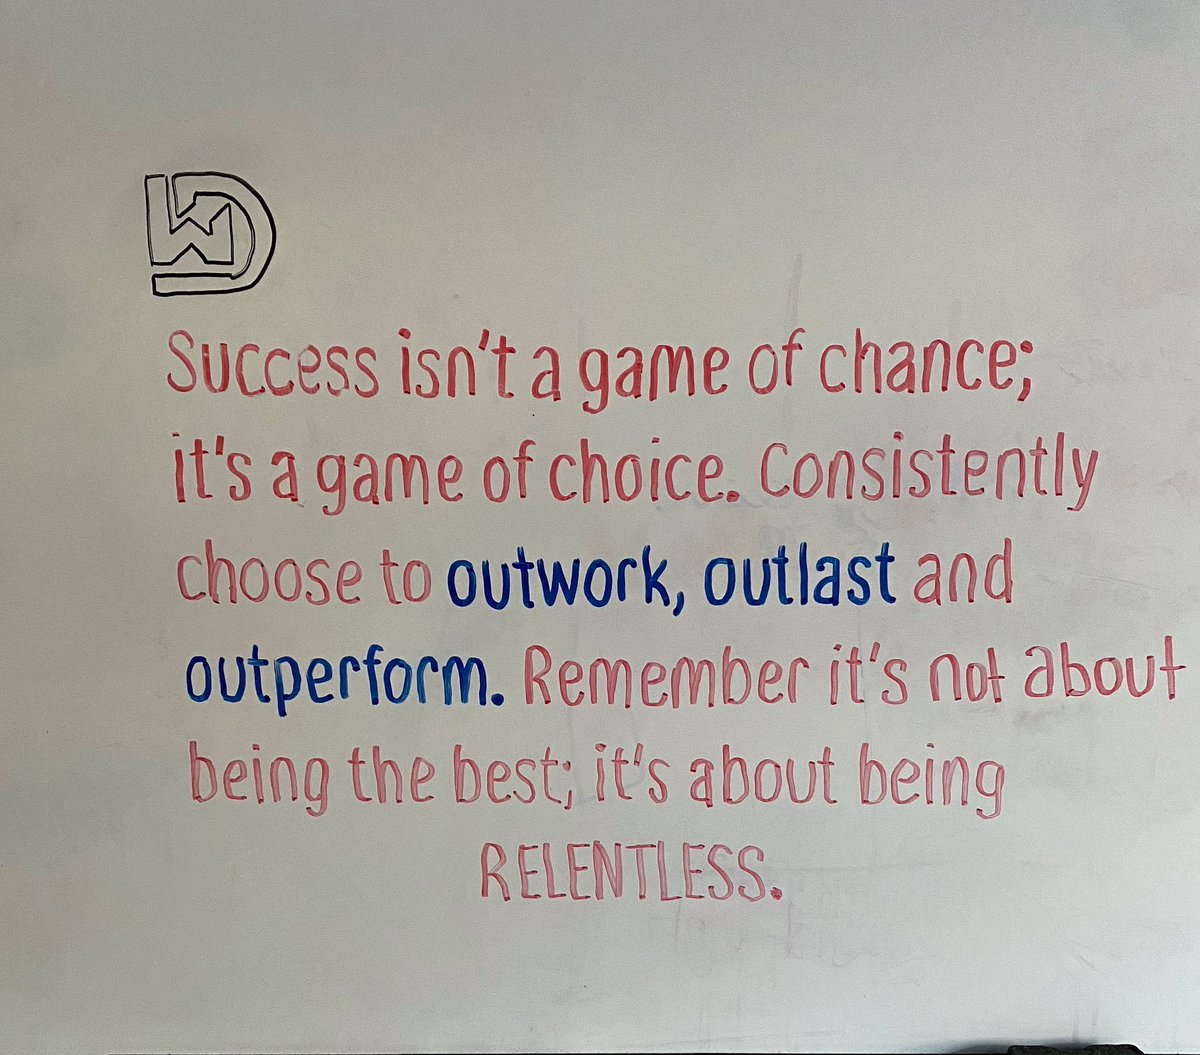 Success isn’t a game of chance; it’s a game of choice. Consistently choose to outwork, outlast and outperform. Remember it’s not about being the best; it’s about being RELENTLESS.